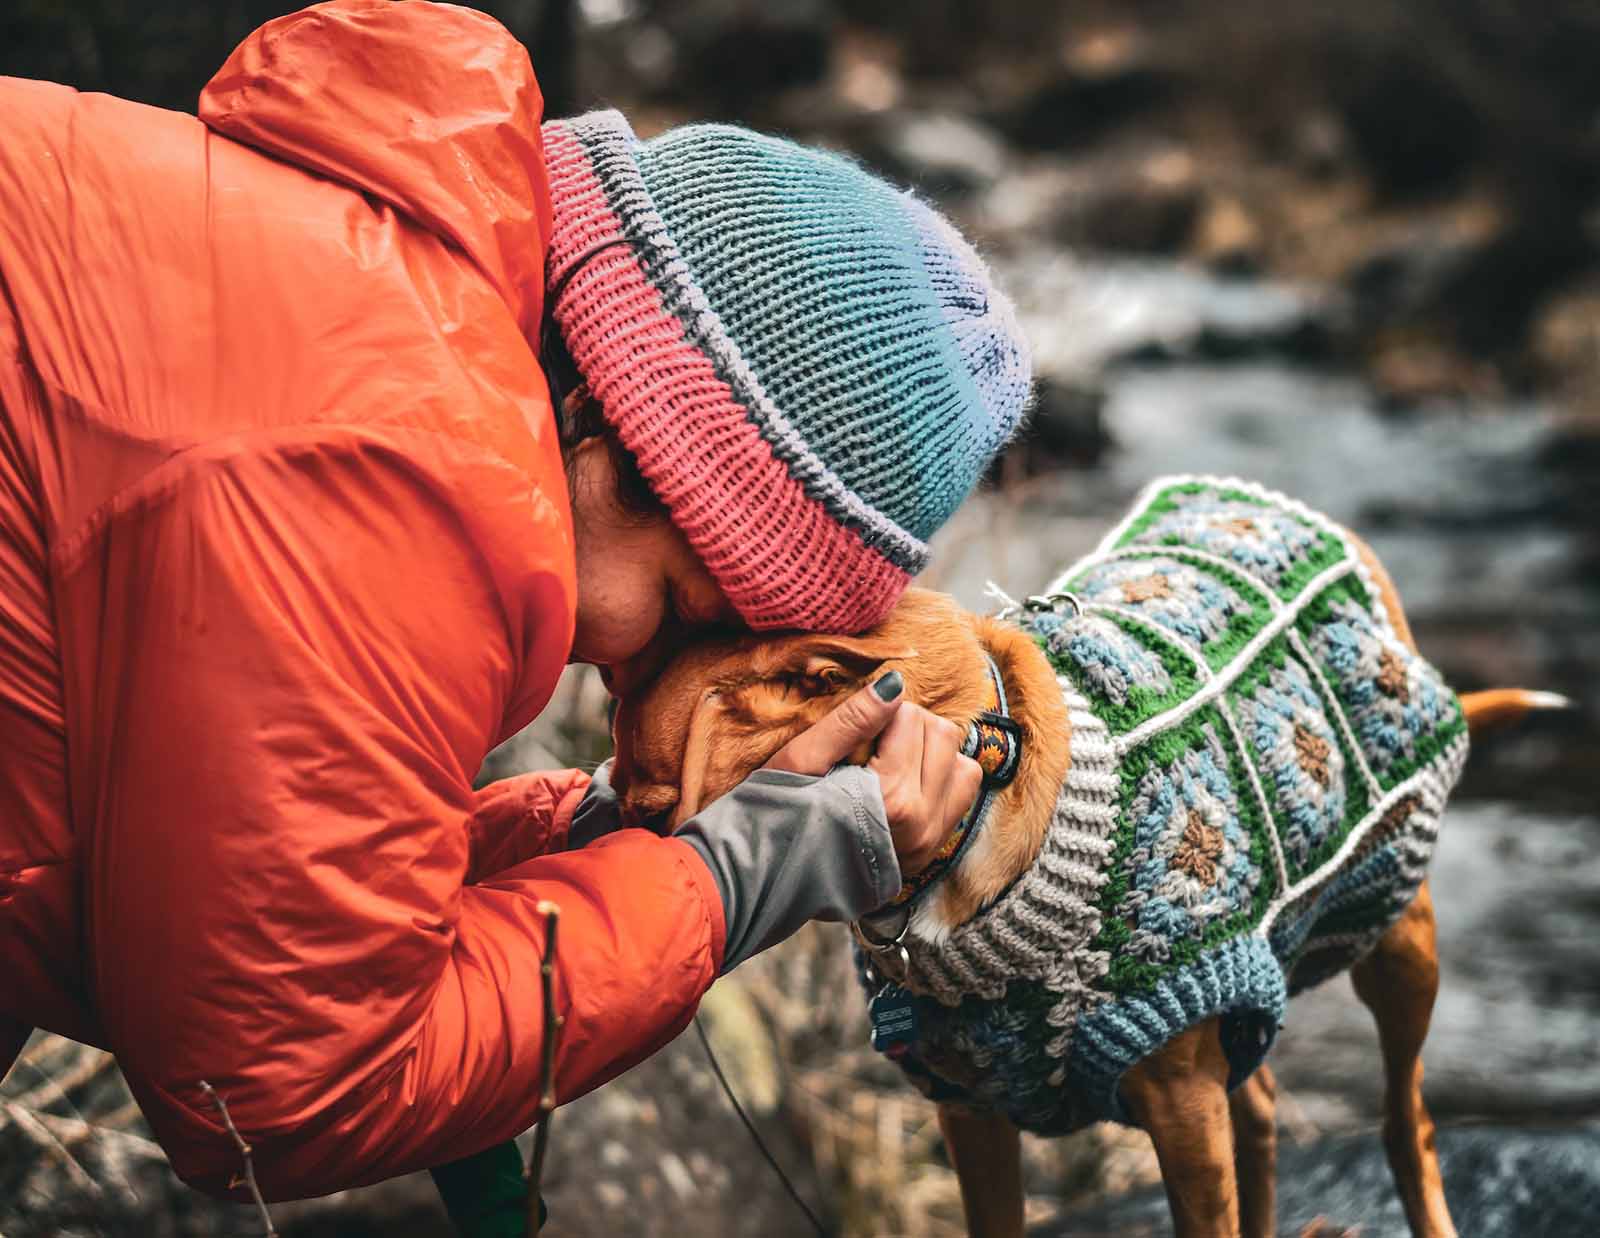 A lady hugging her dog, they are both wearing knitting gear like hats and sweater